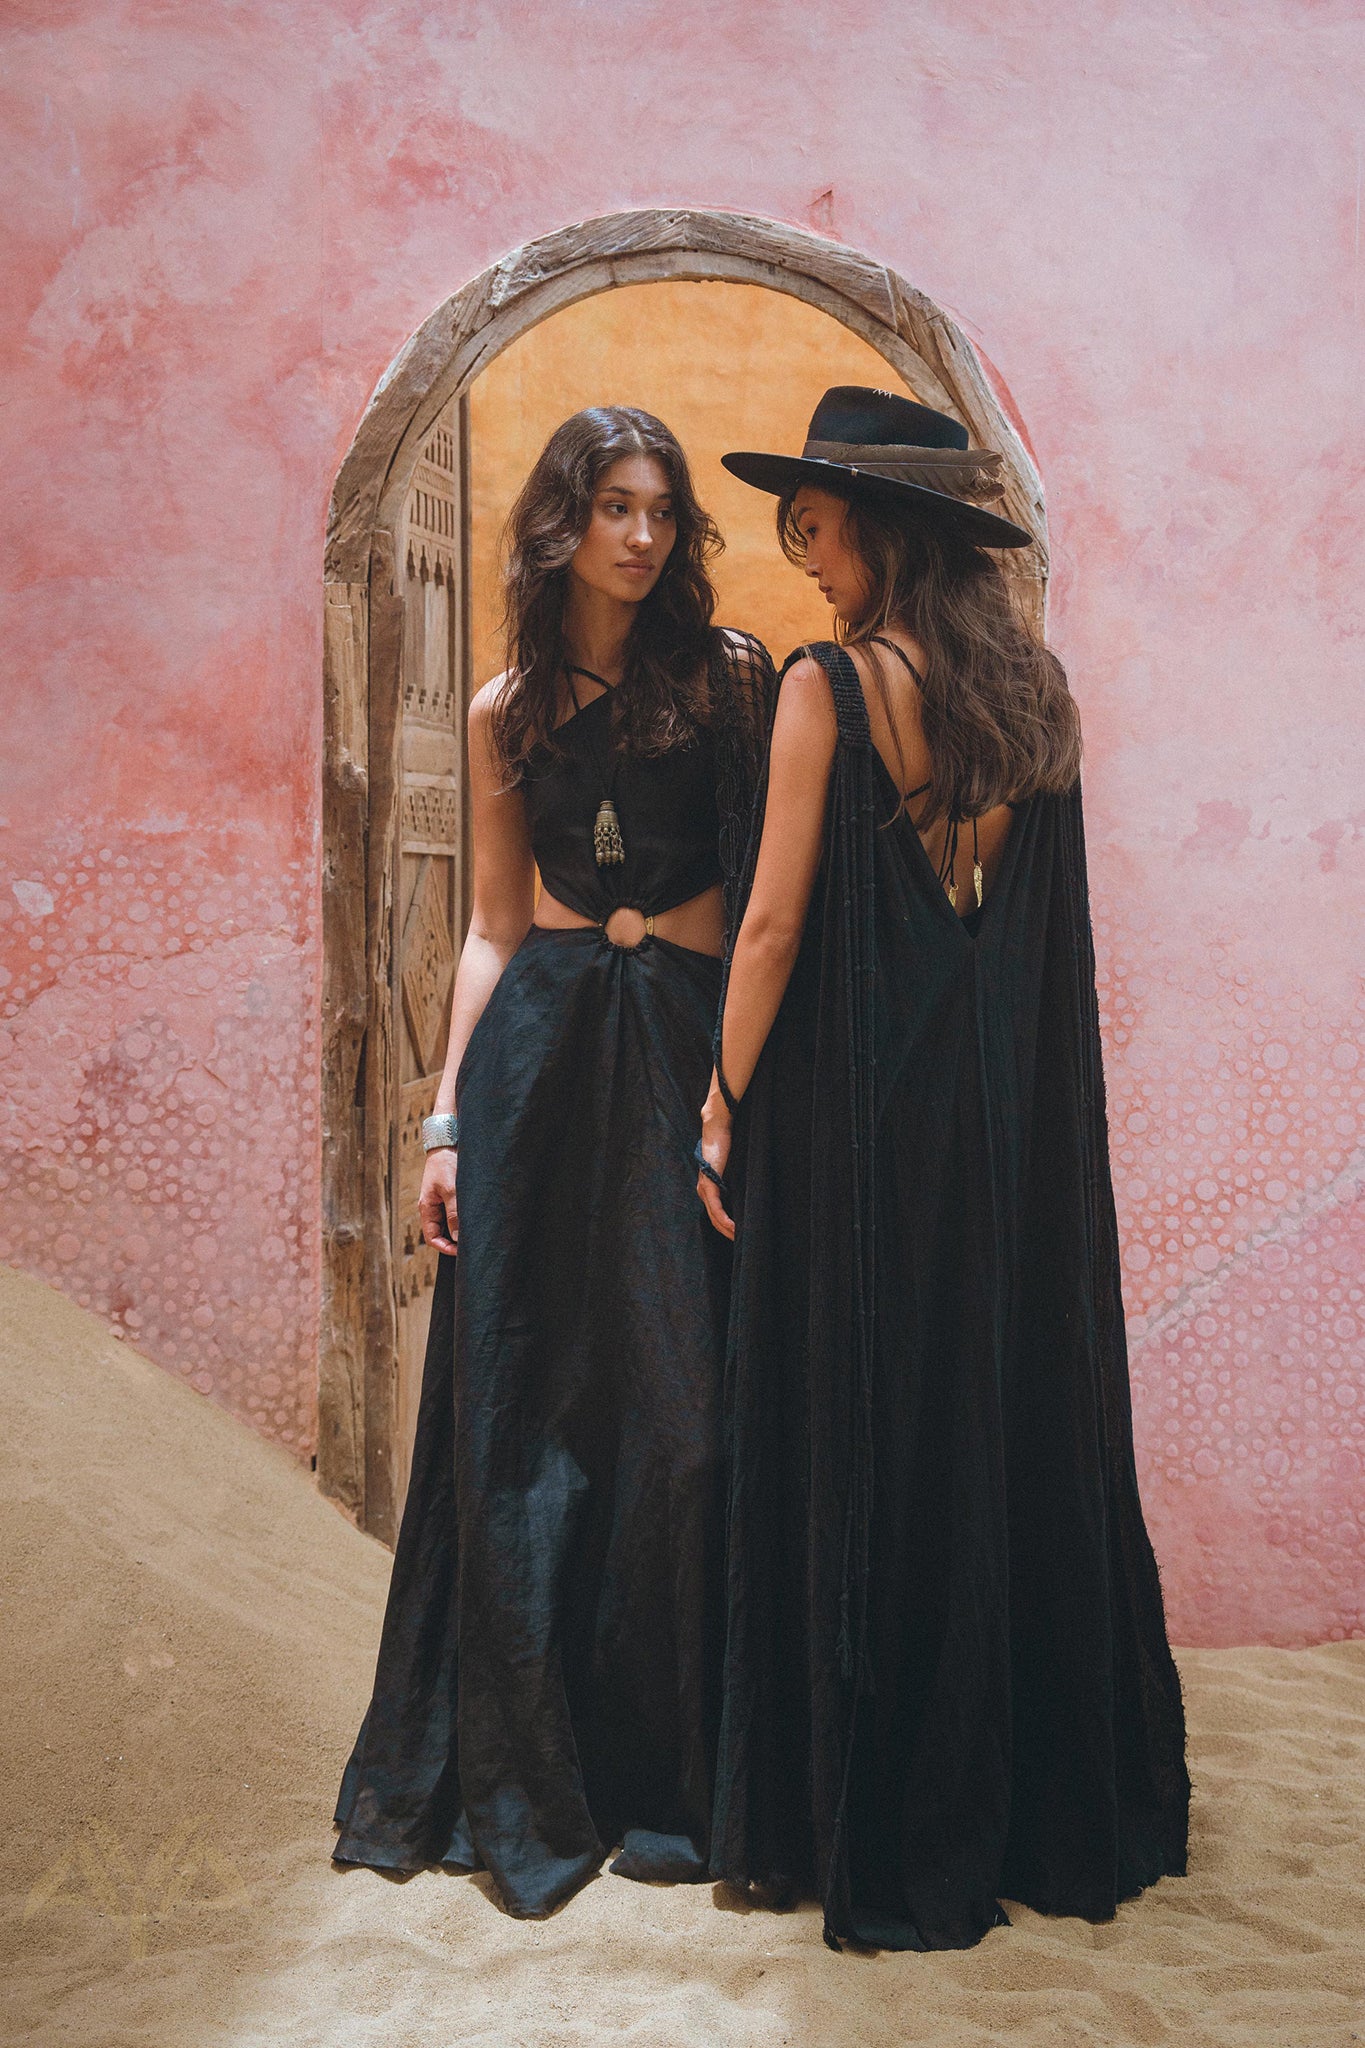 Show off your unique style with the one-of-a-kind black cape dress from Aya Sacred Wear.